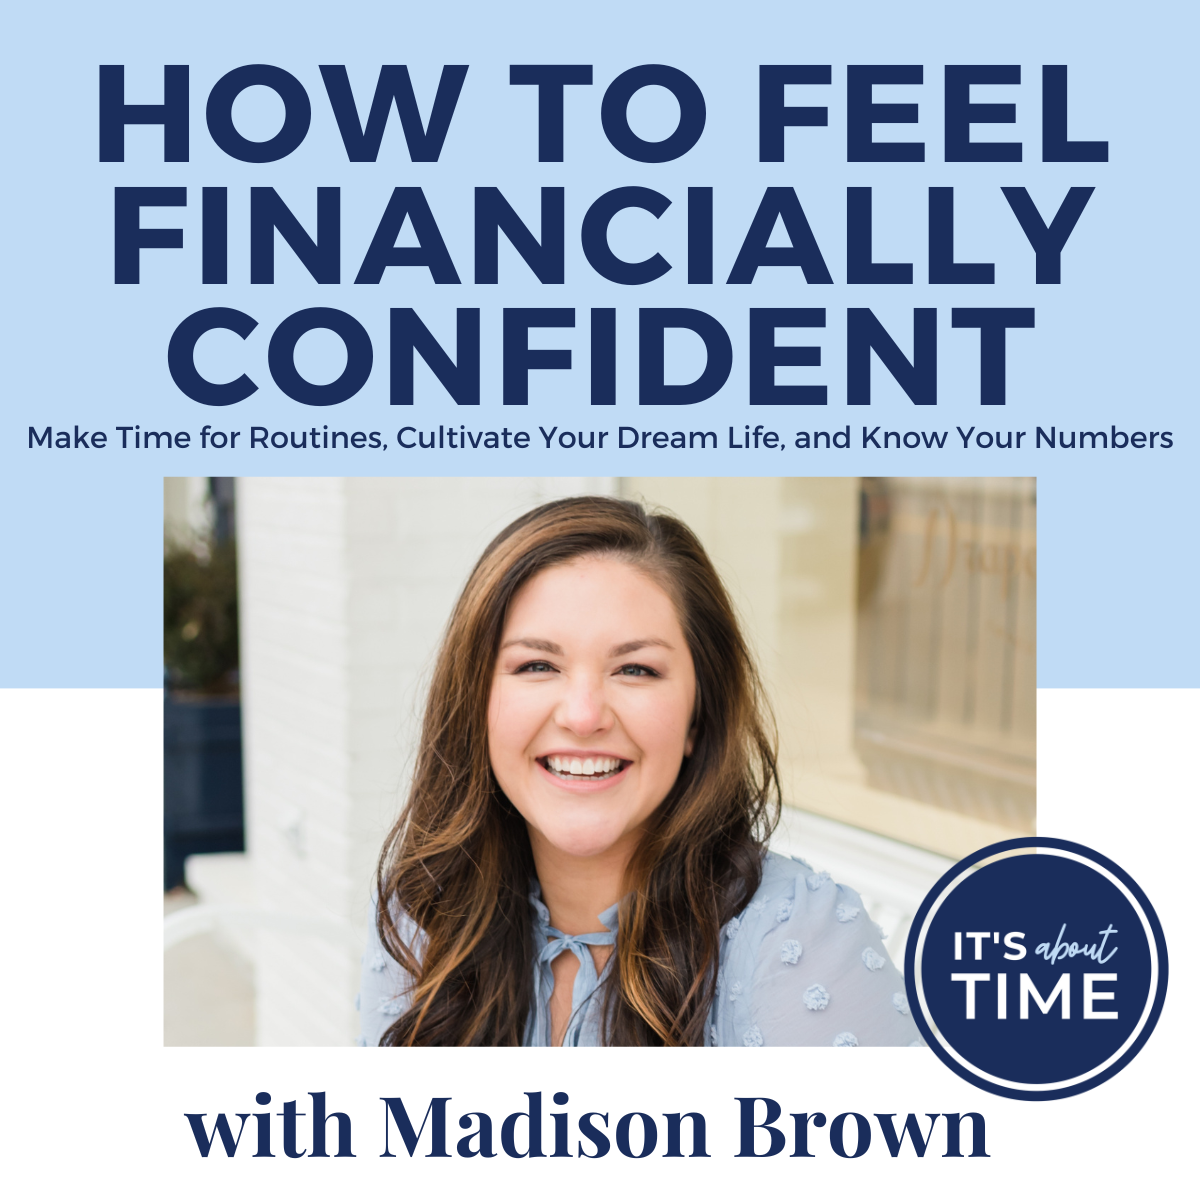 Gain Financial Confidence with Madison Brown